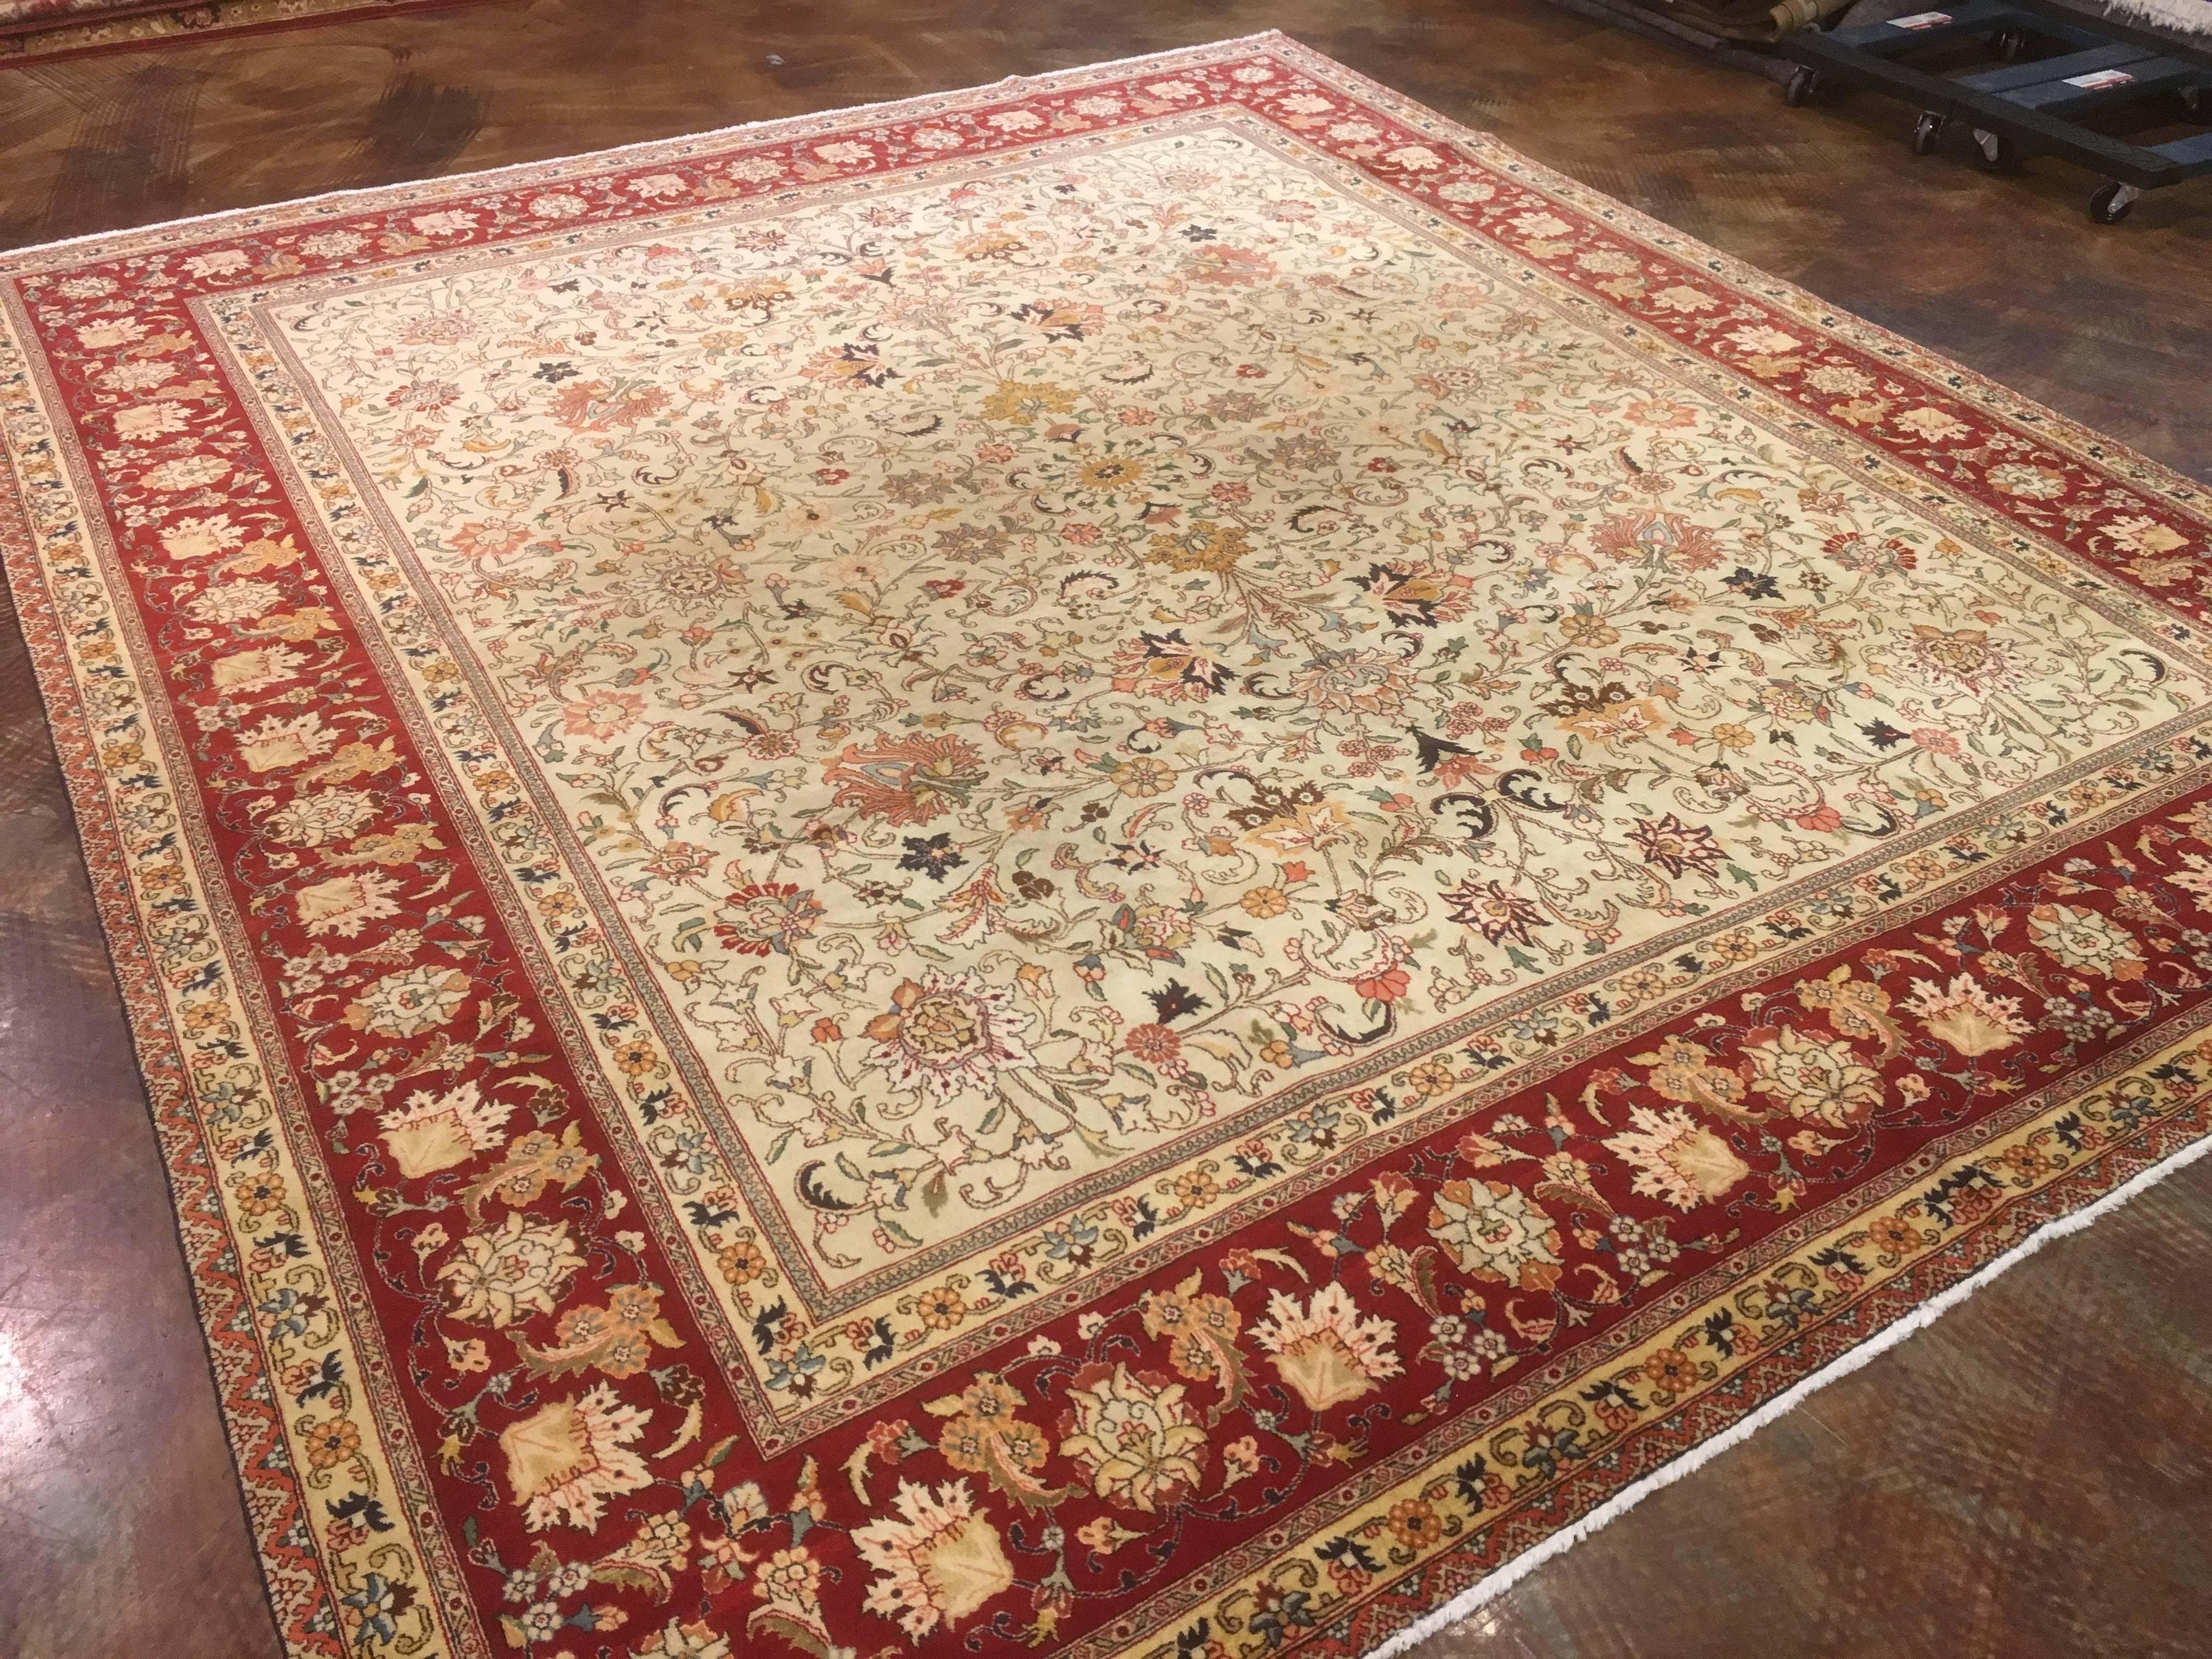 Persian Tabriz circa 1930 signed by the weaver, fine rug, square in size 9.5 x 10.9 condition is good, has no repairs and has excellent colors. This is a true Persian rug and quality of weave is known as a 50 Raj.